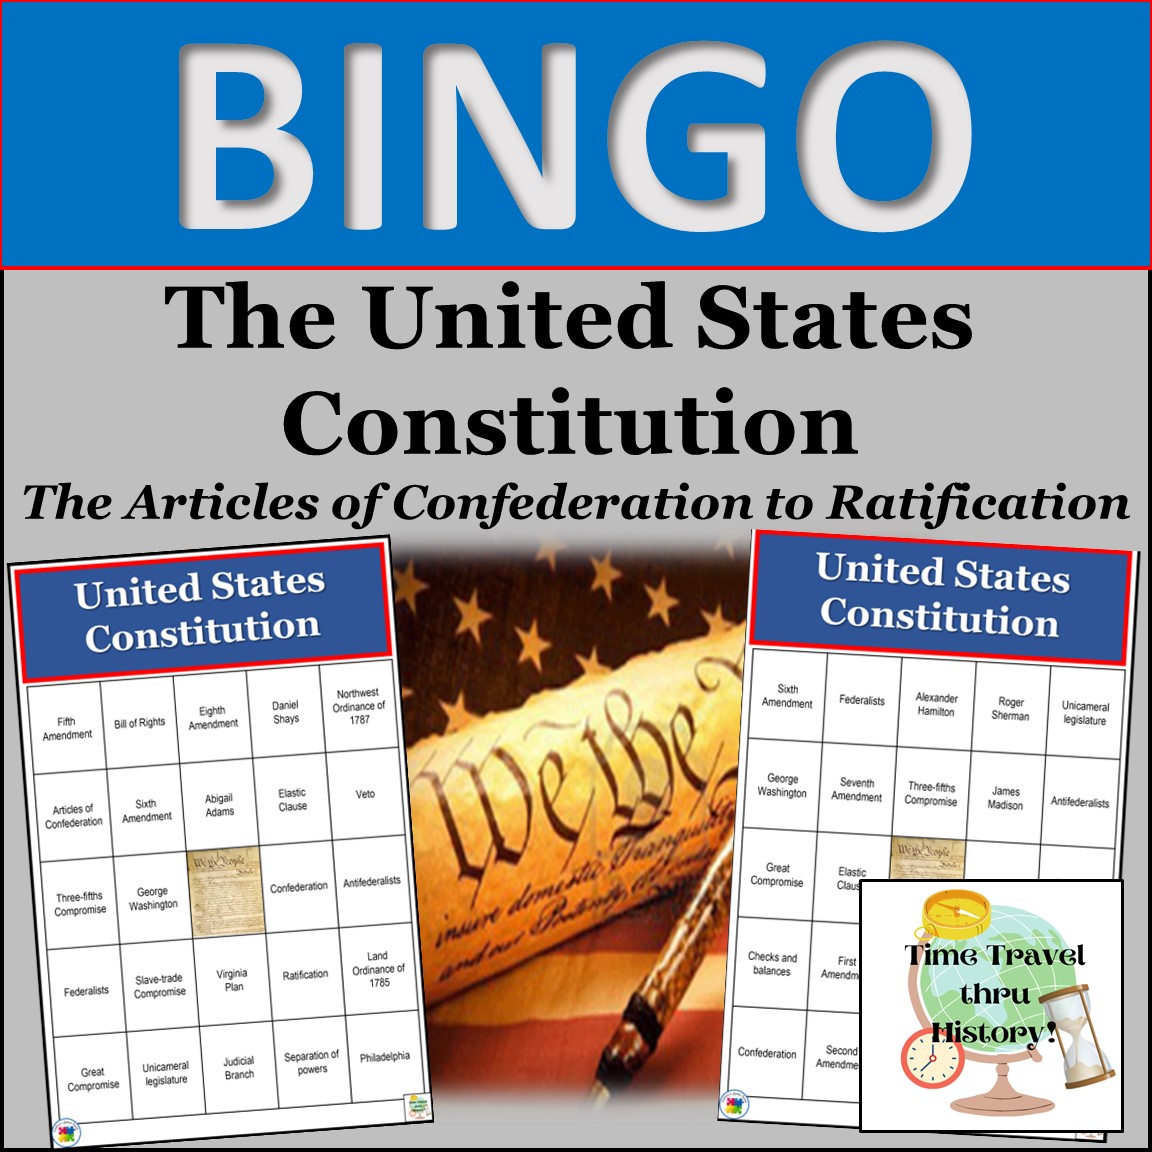 United States Constitution BINGO Review Game Activity: Articles of Confederation to Ratification